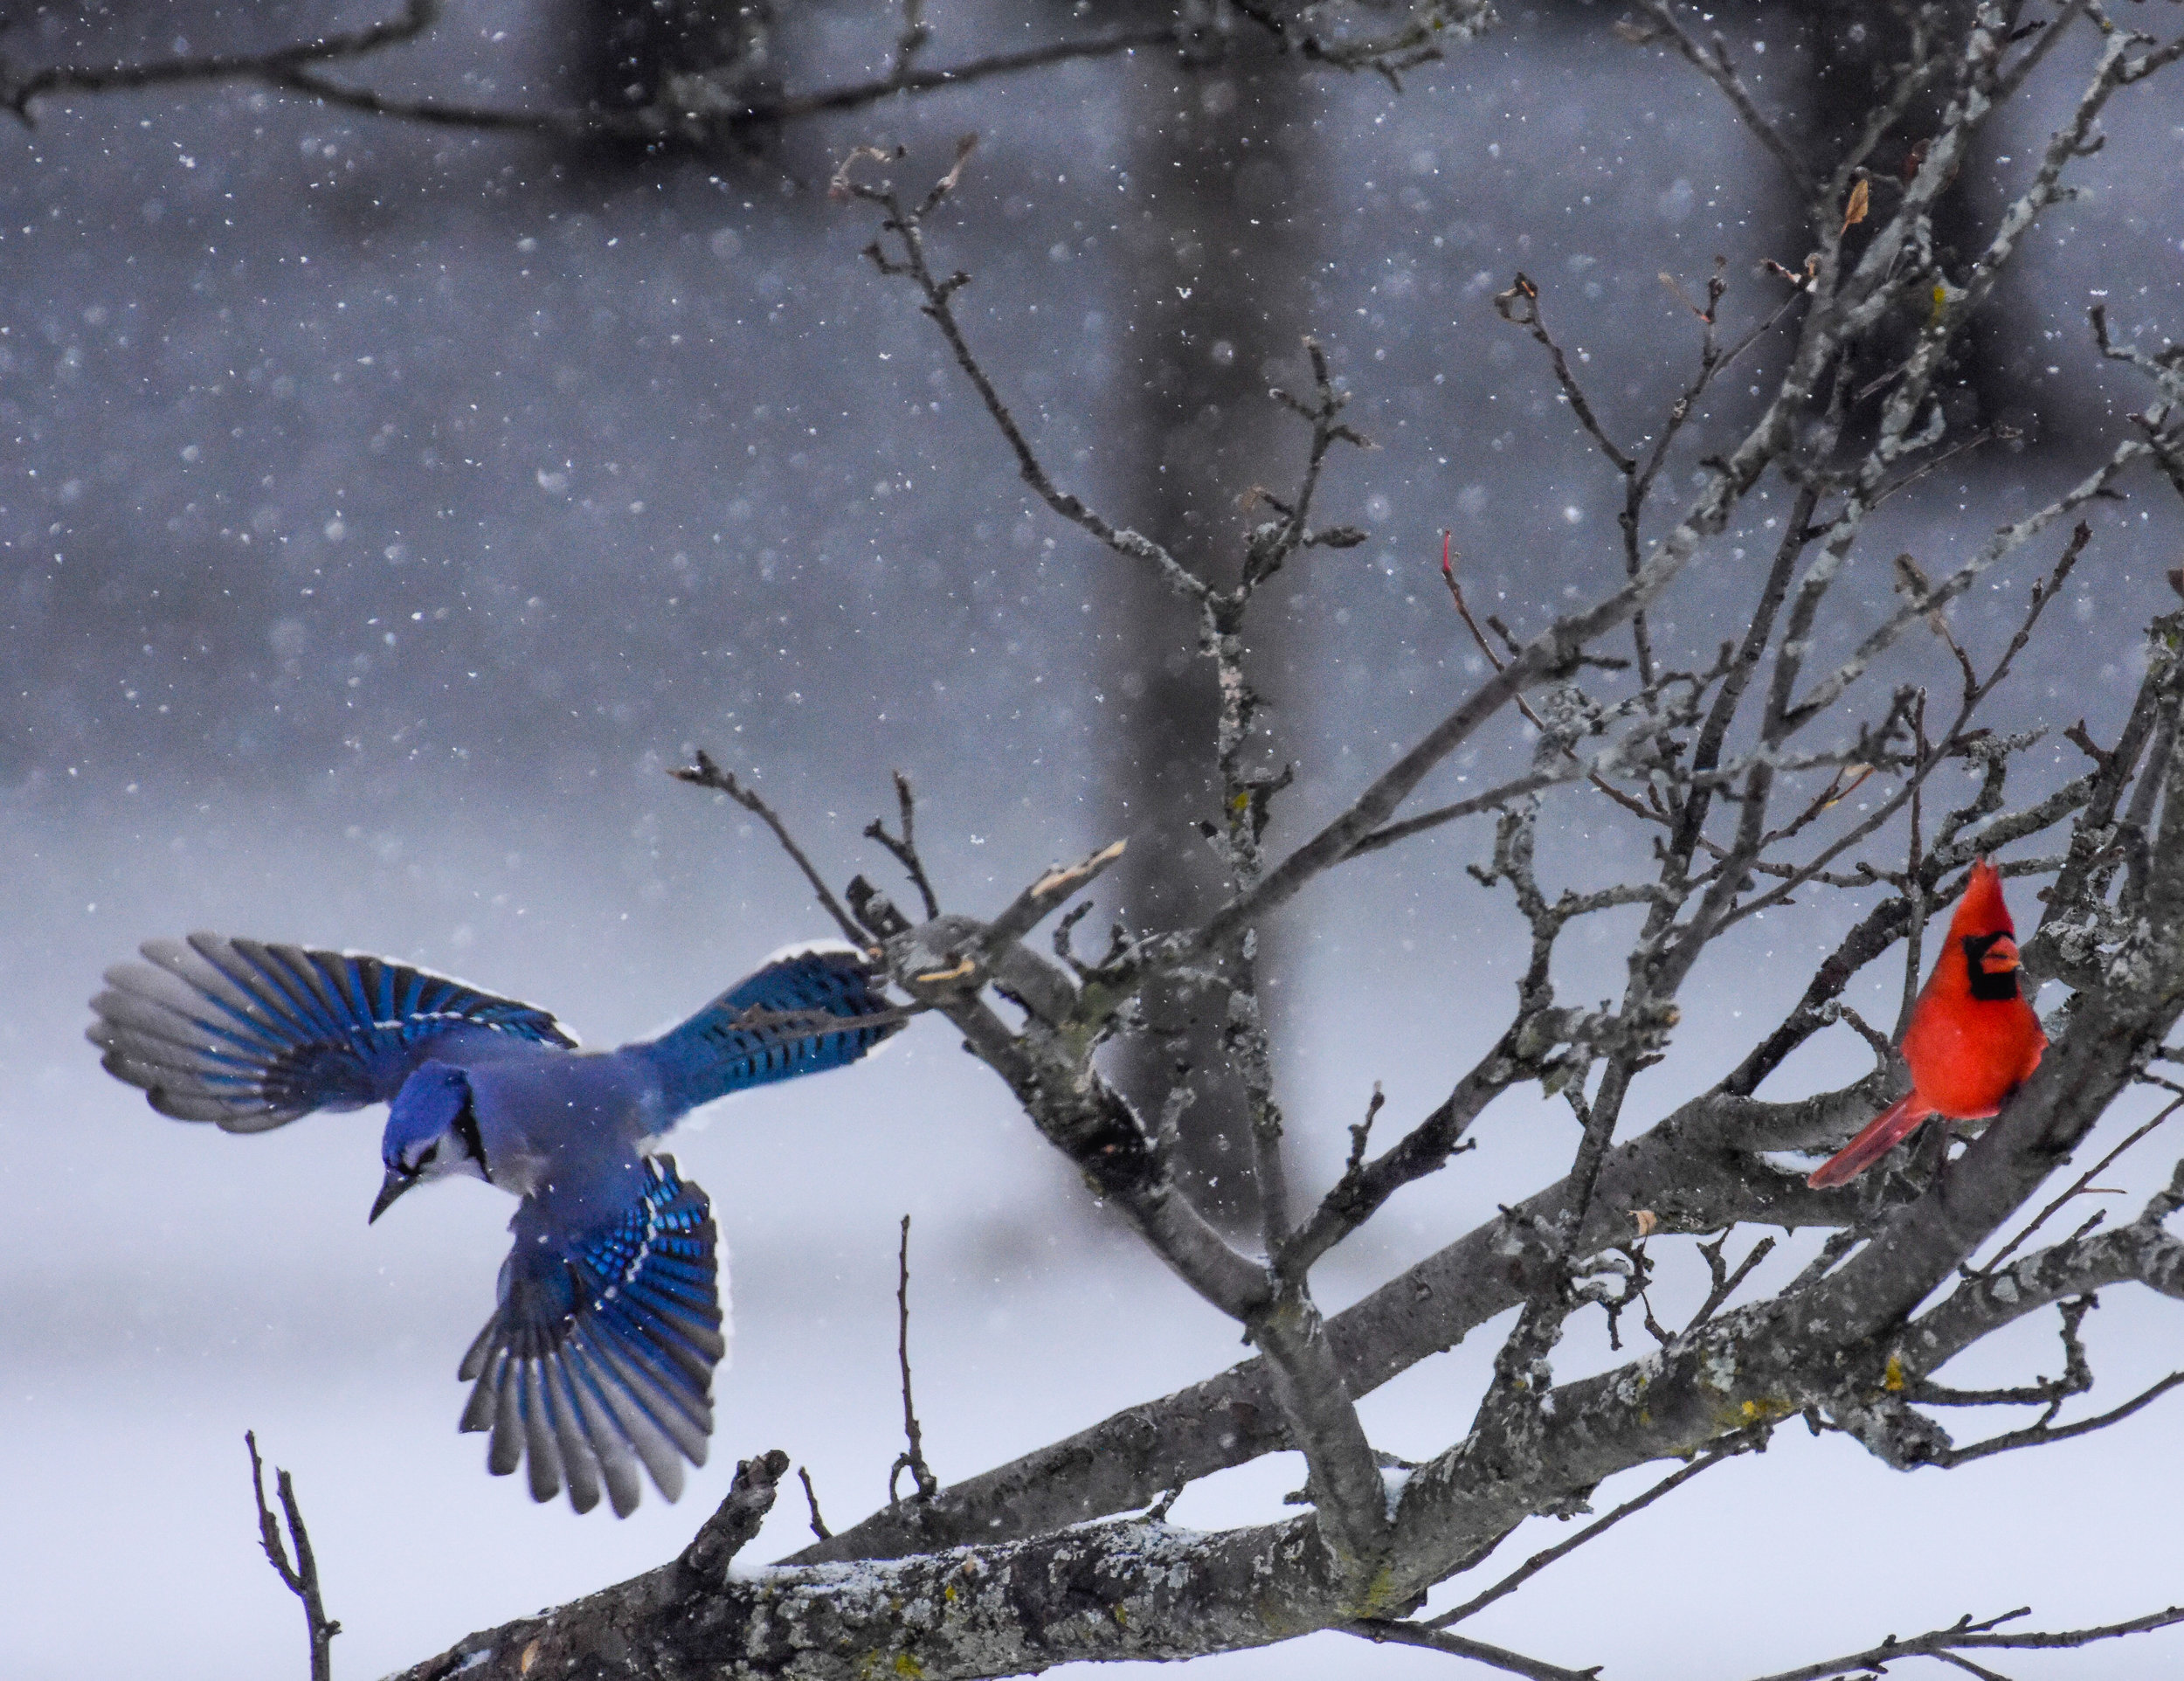 Male Cardinal in Tree and Blue Jay in Flight